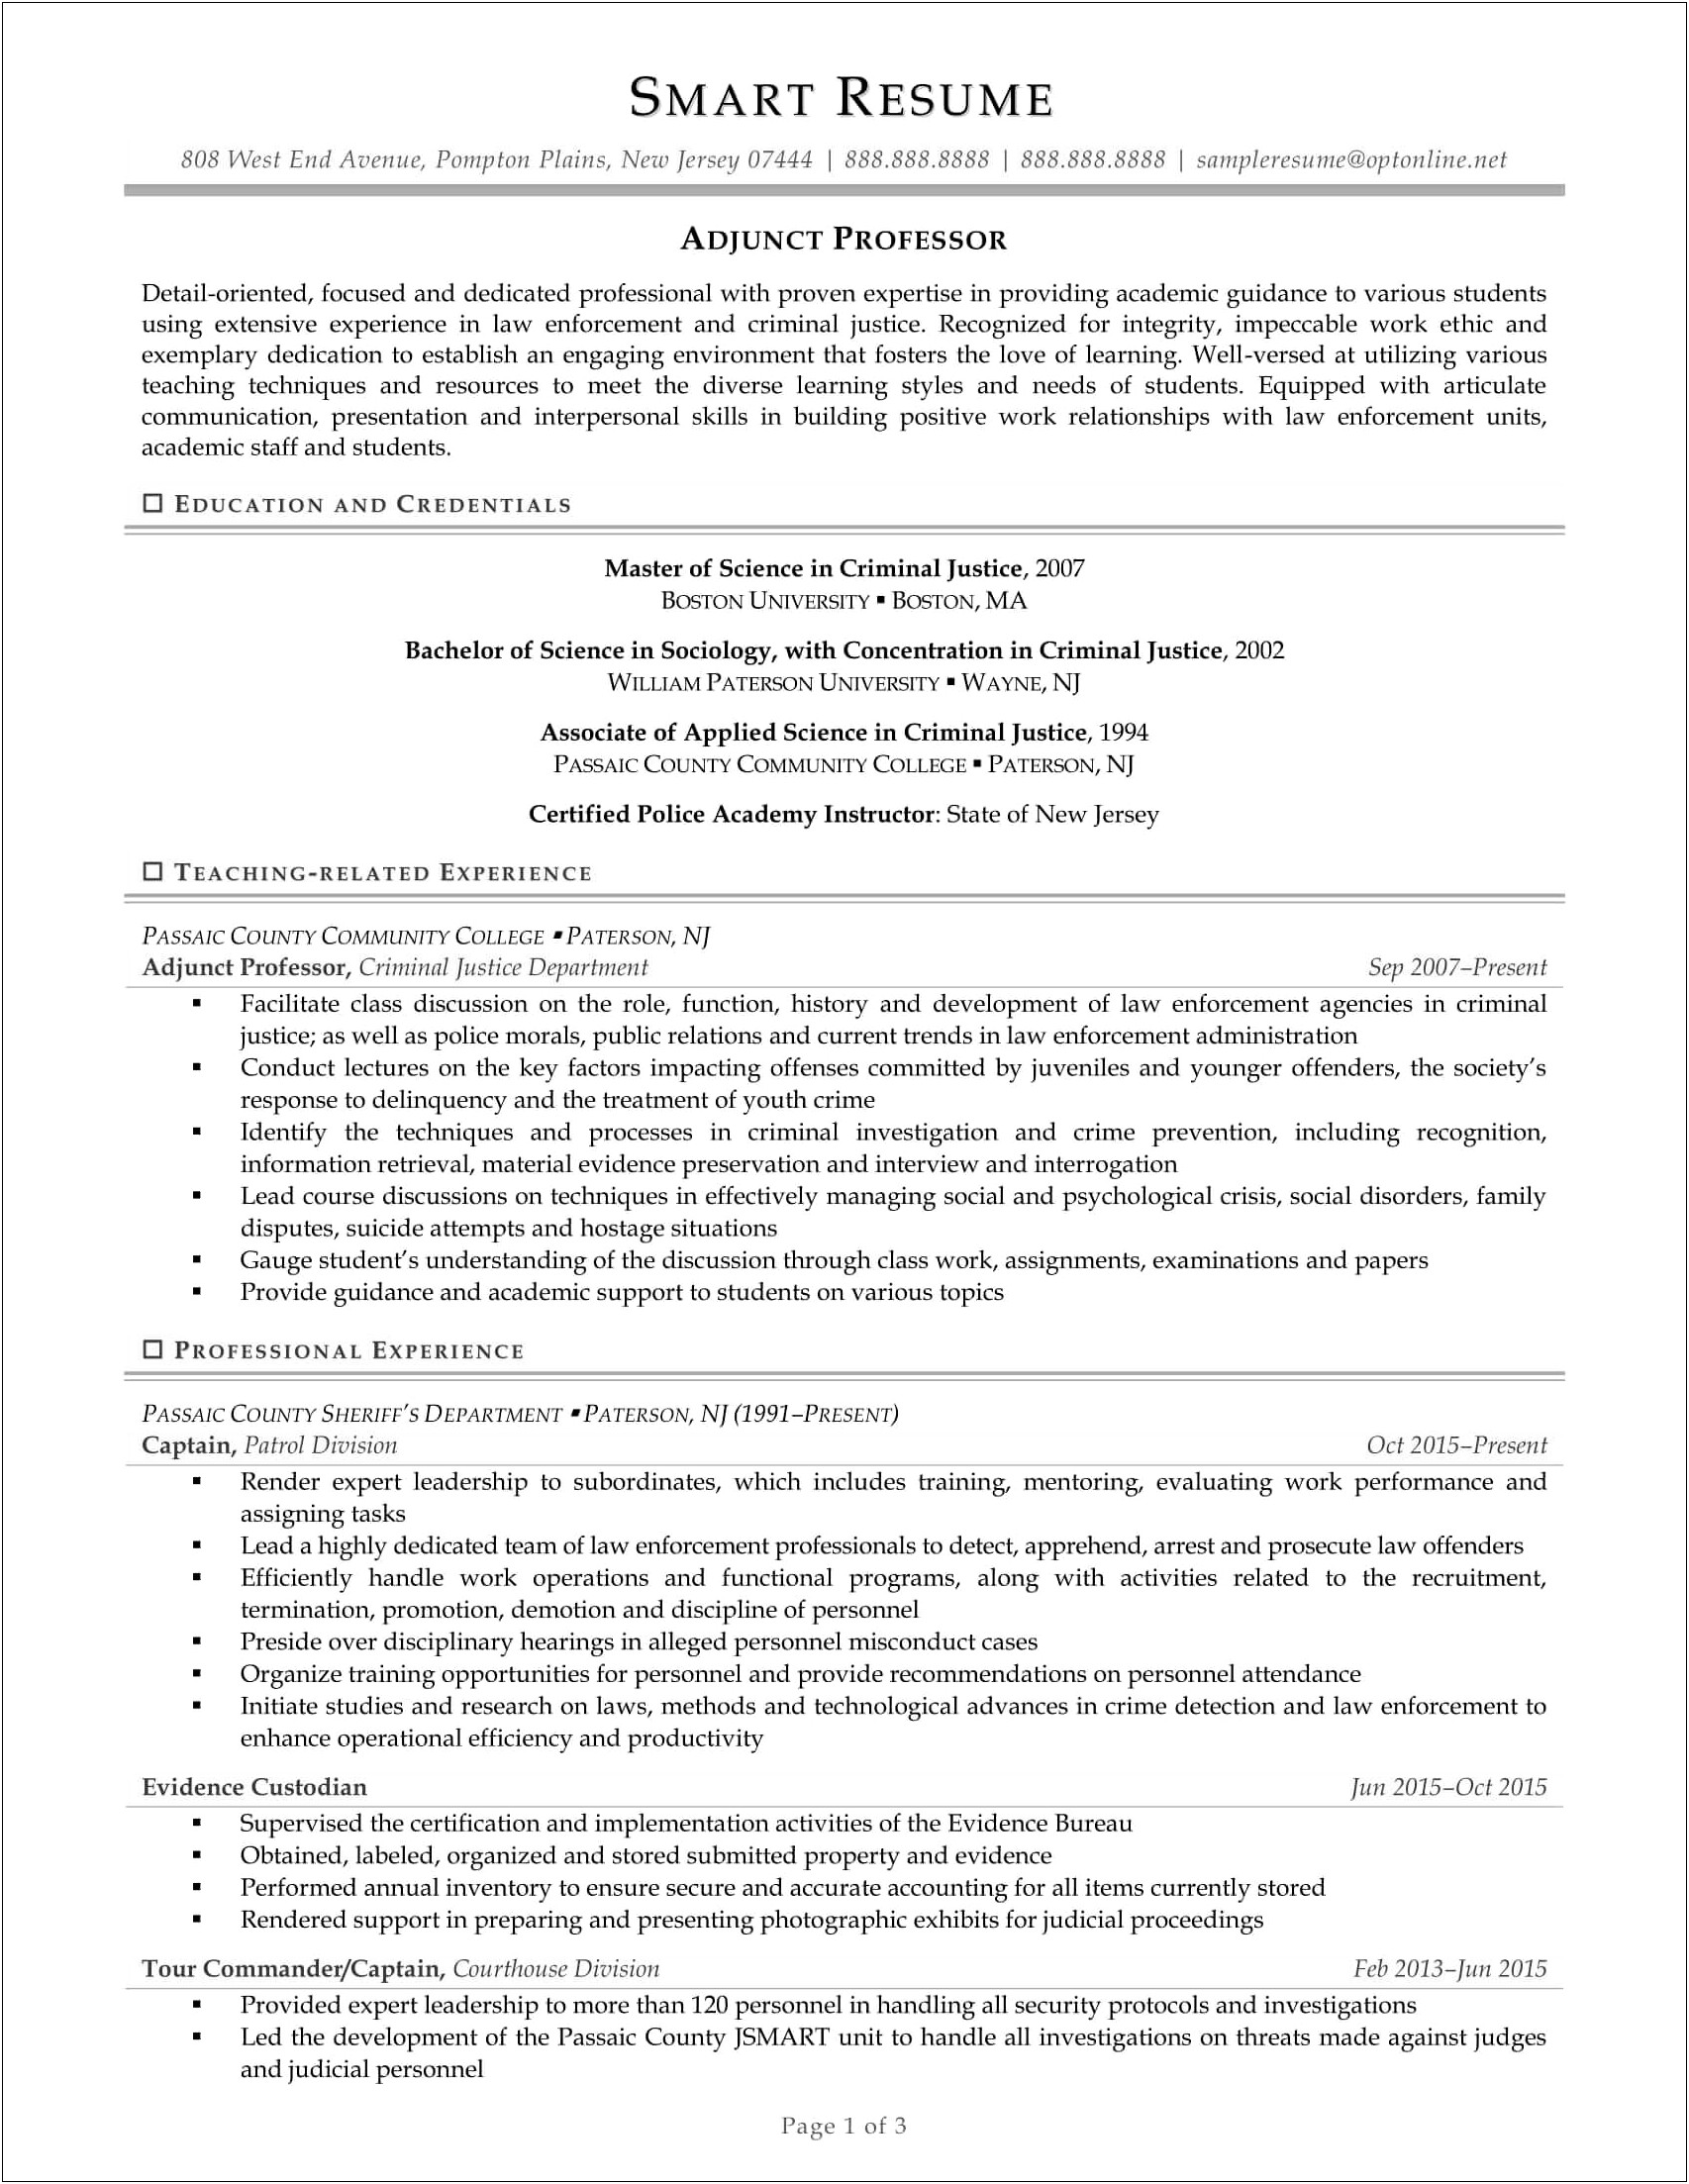 Entry Level Construction Management Resume Examples